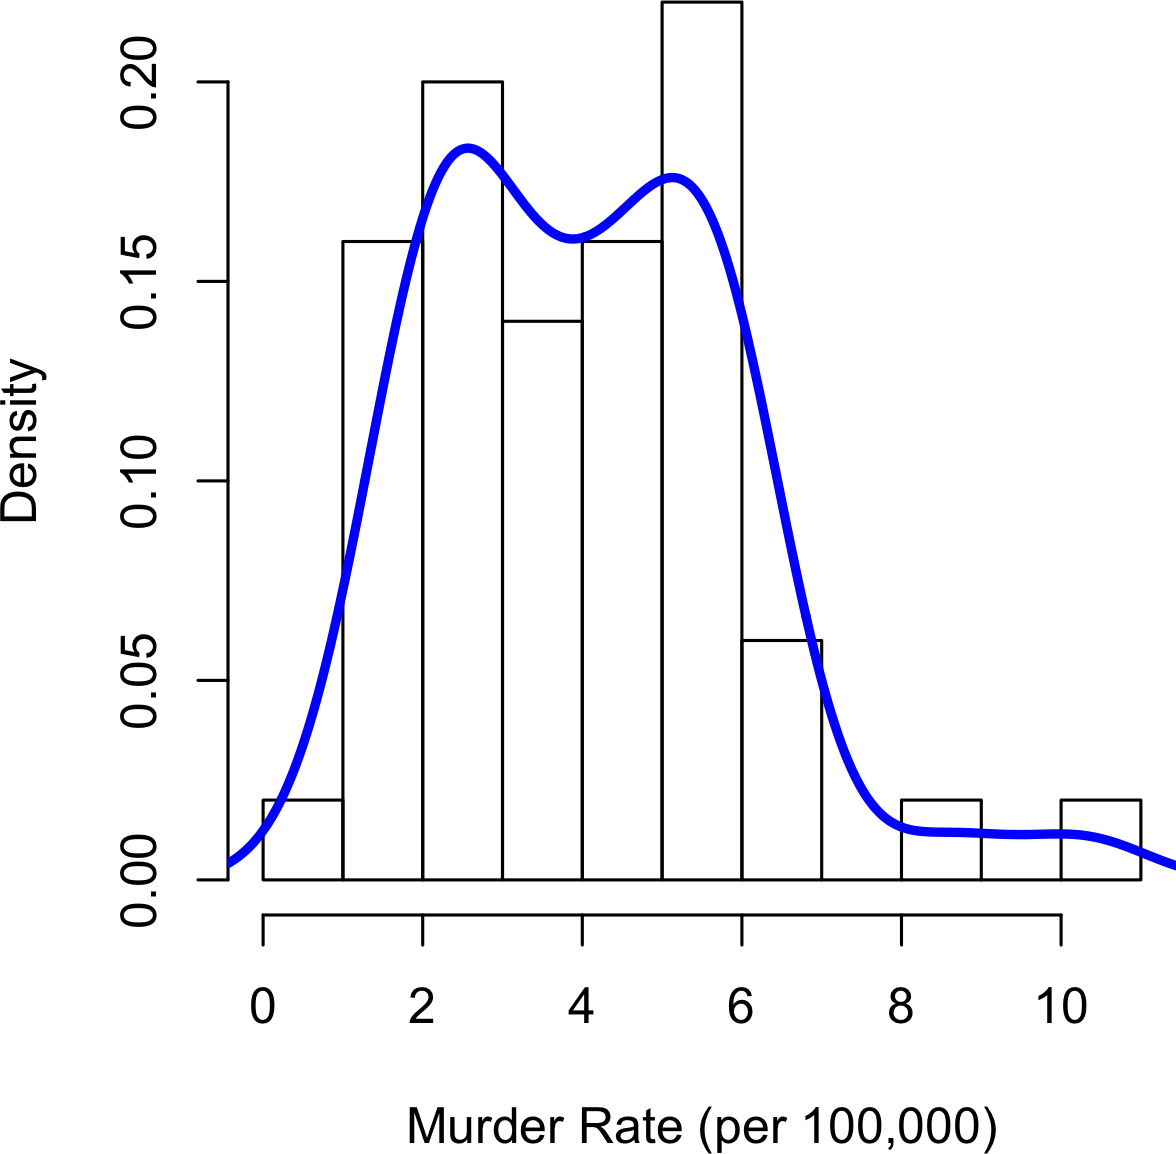 Density of state murder rates